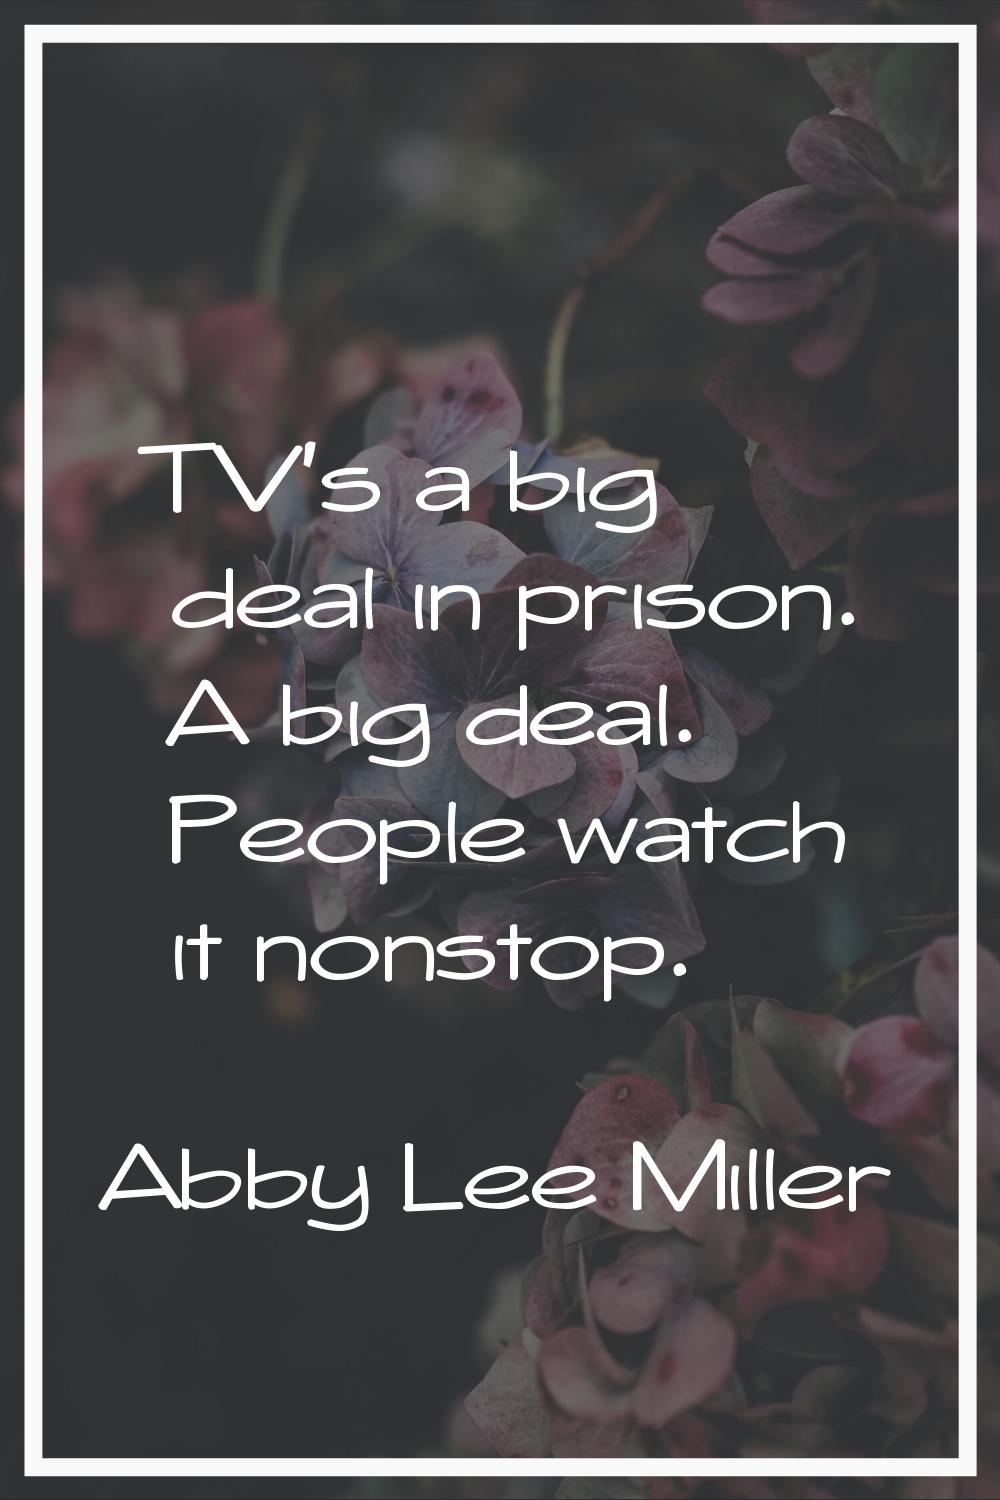 TV's a big deal in prison. A big deal. People watch it nonstop.